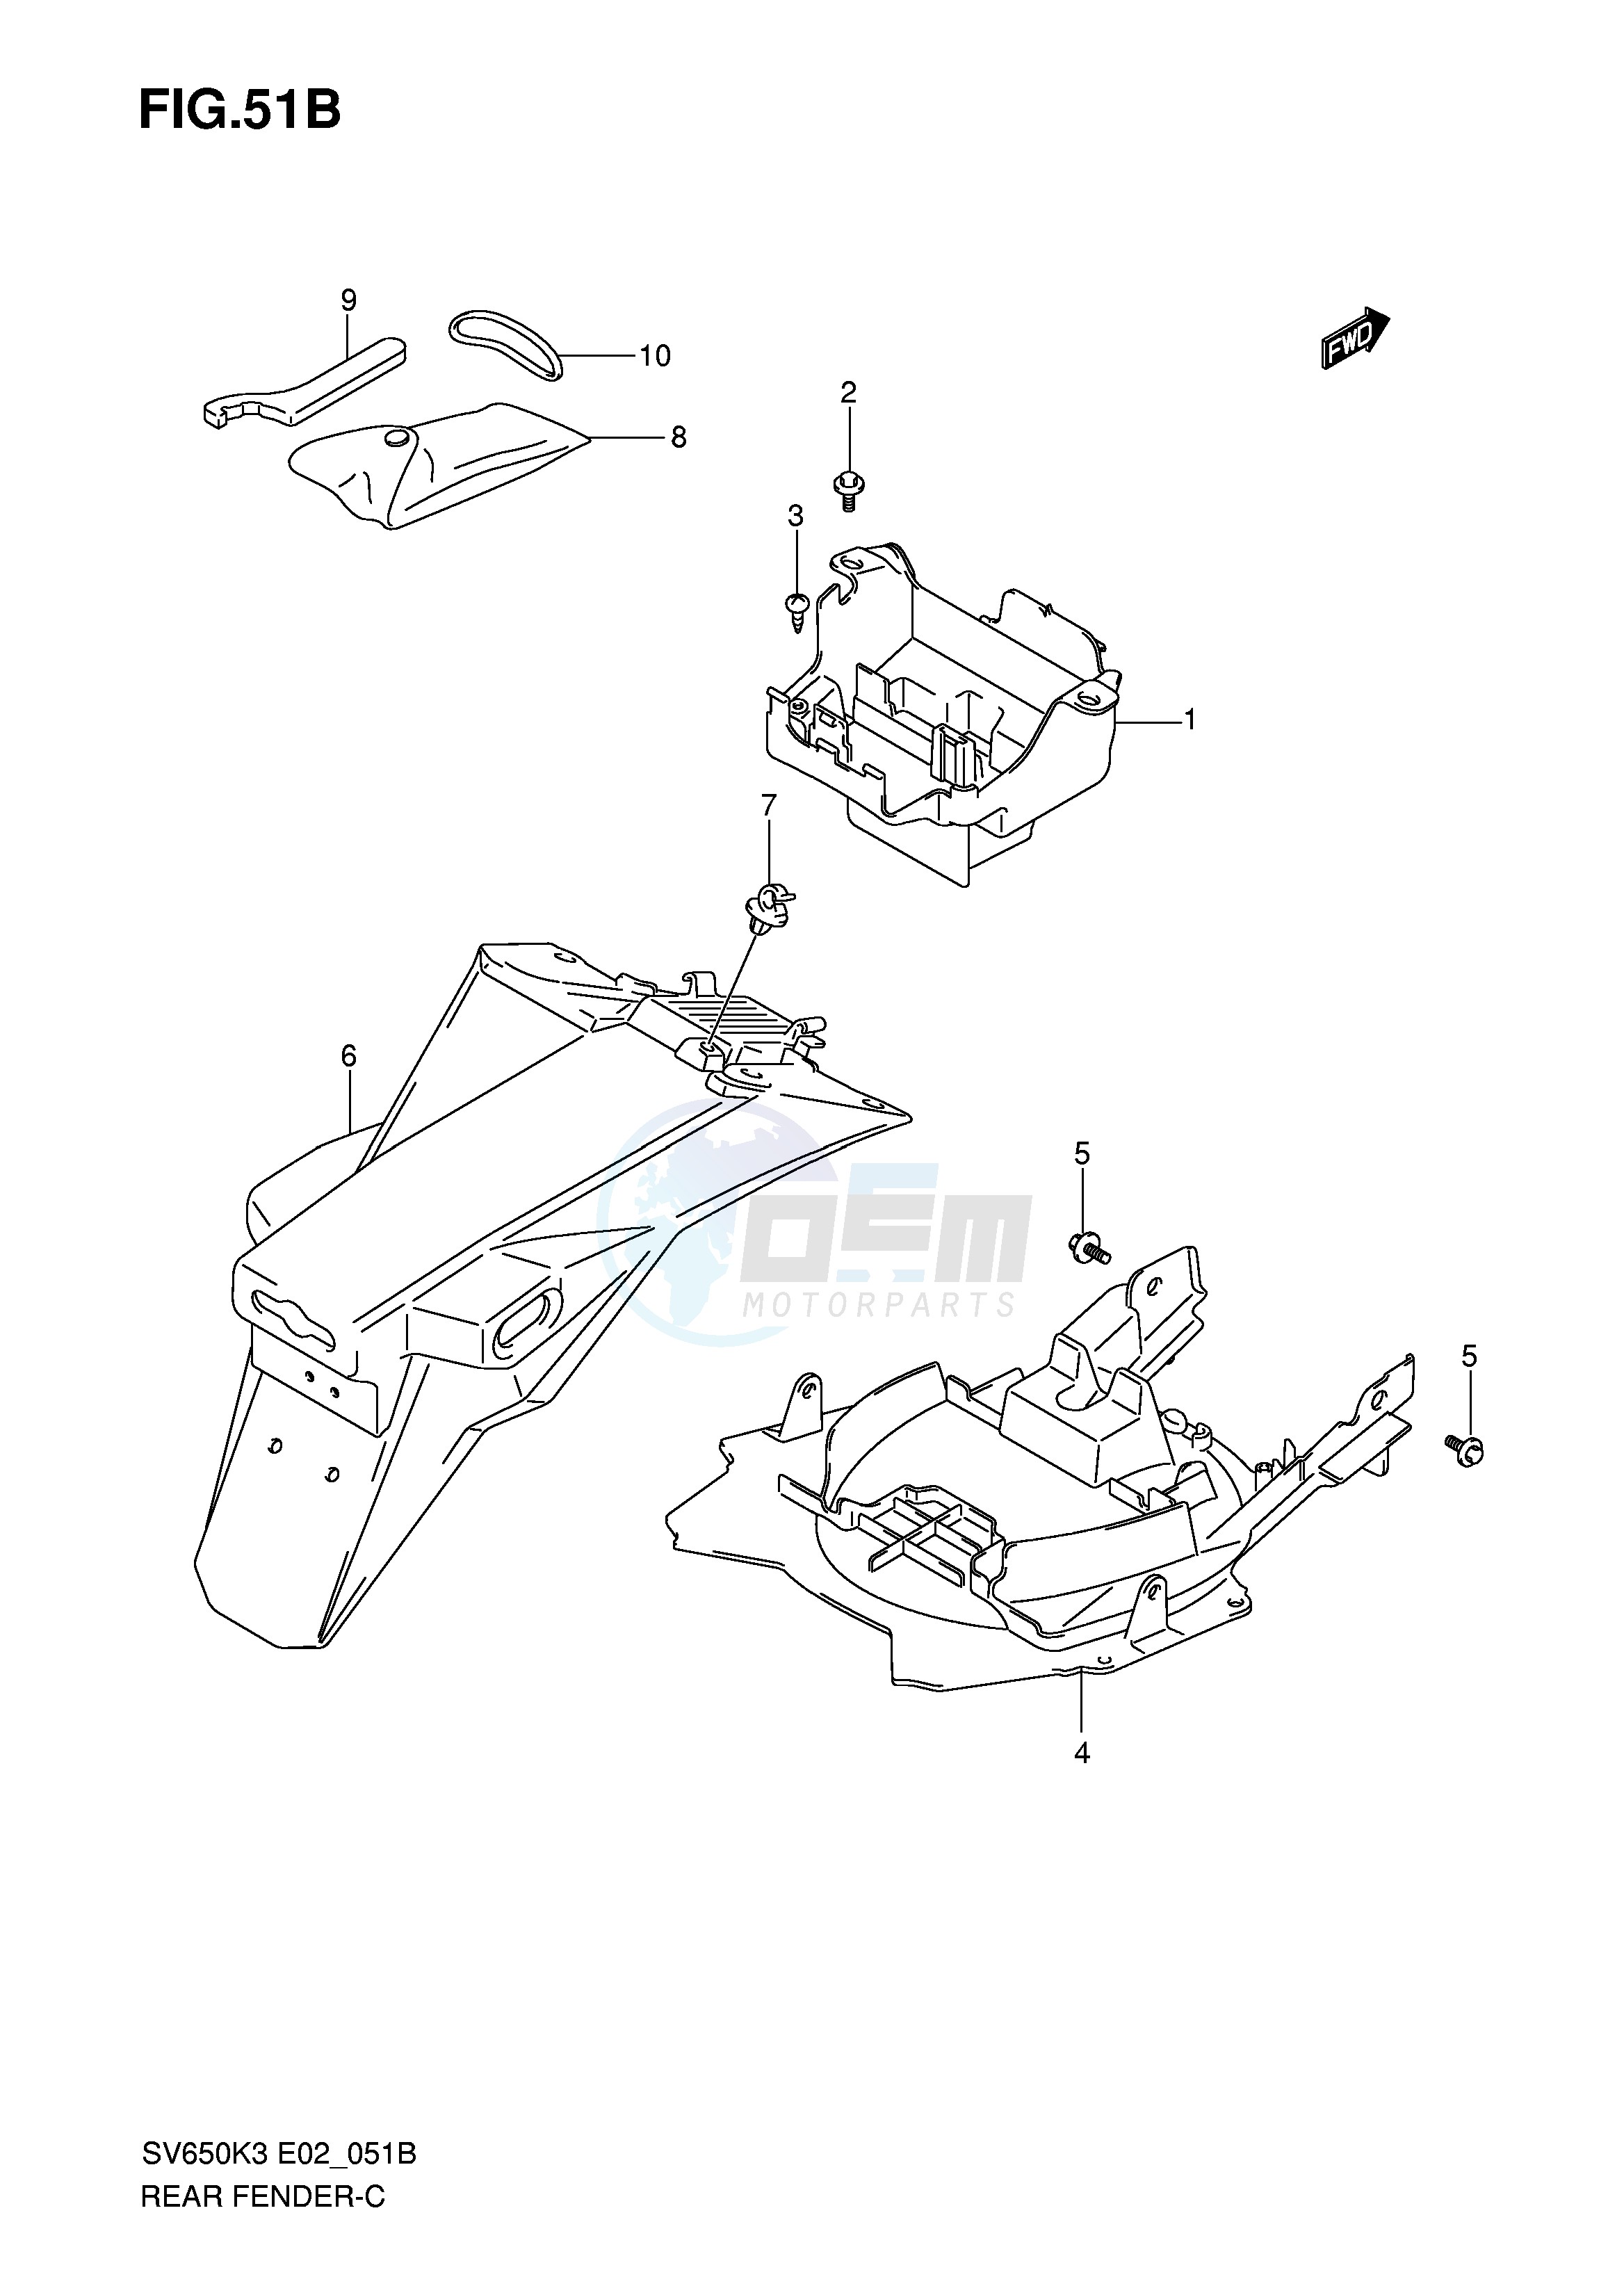 REAR FENDER (WITH ABS) blueprint